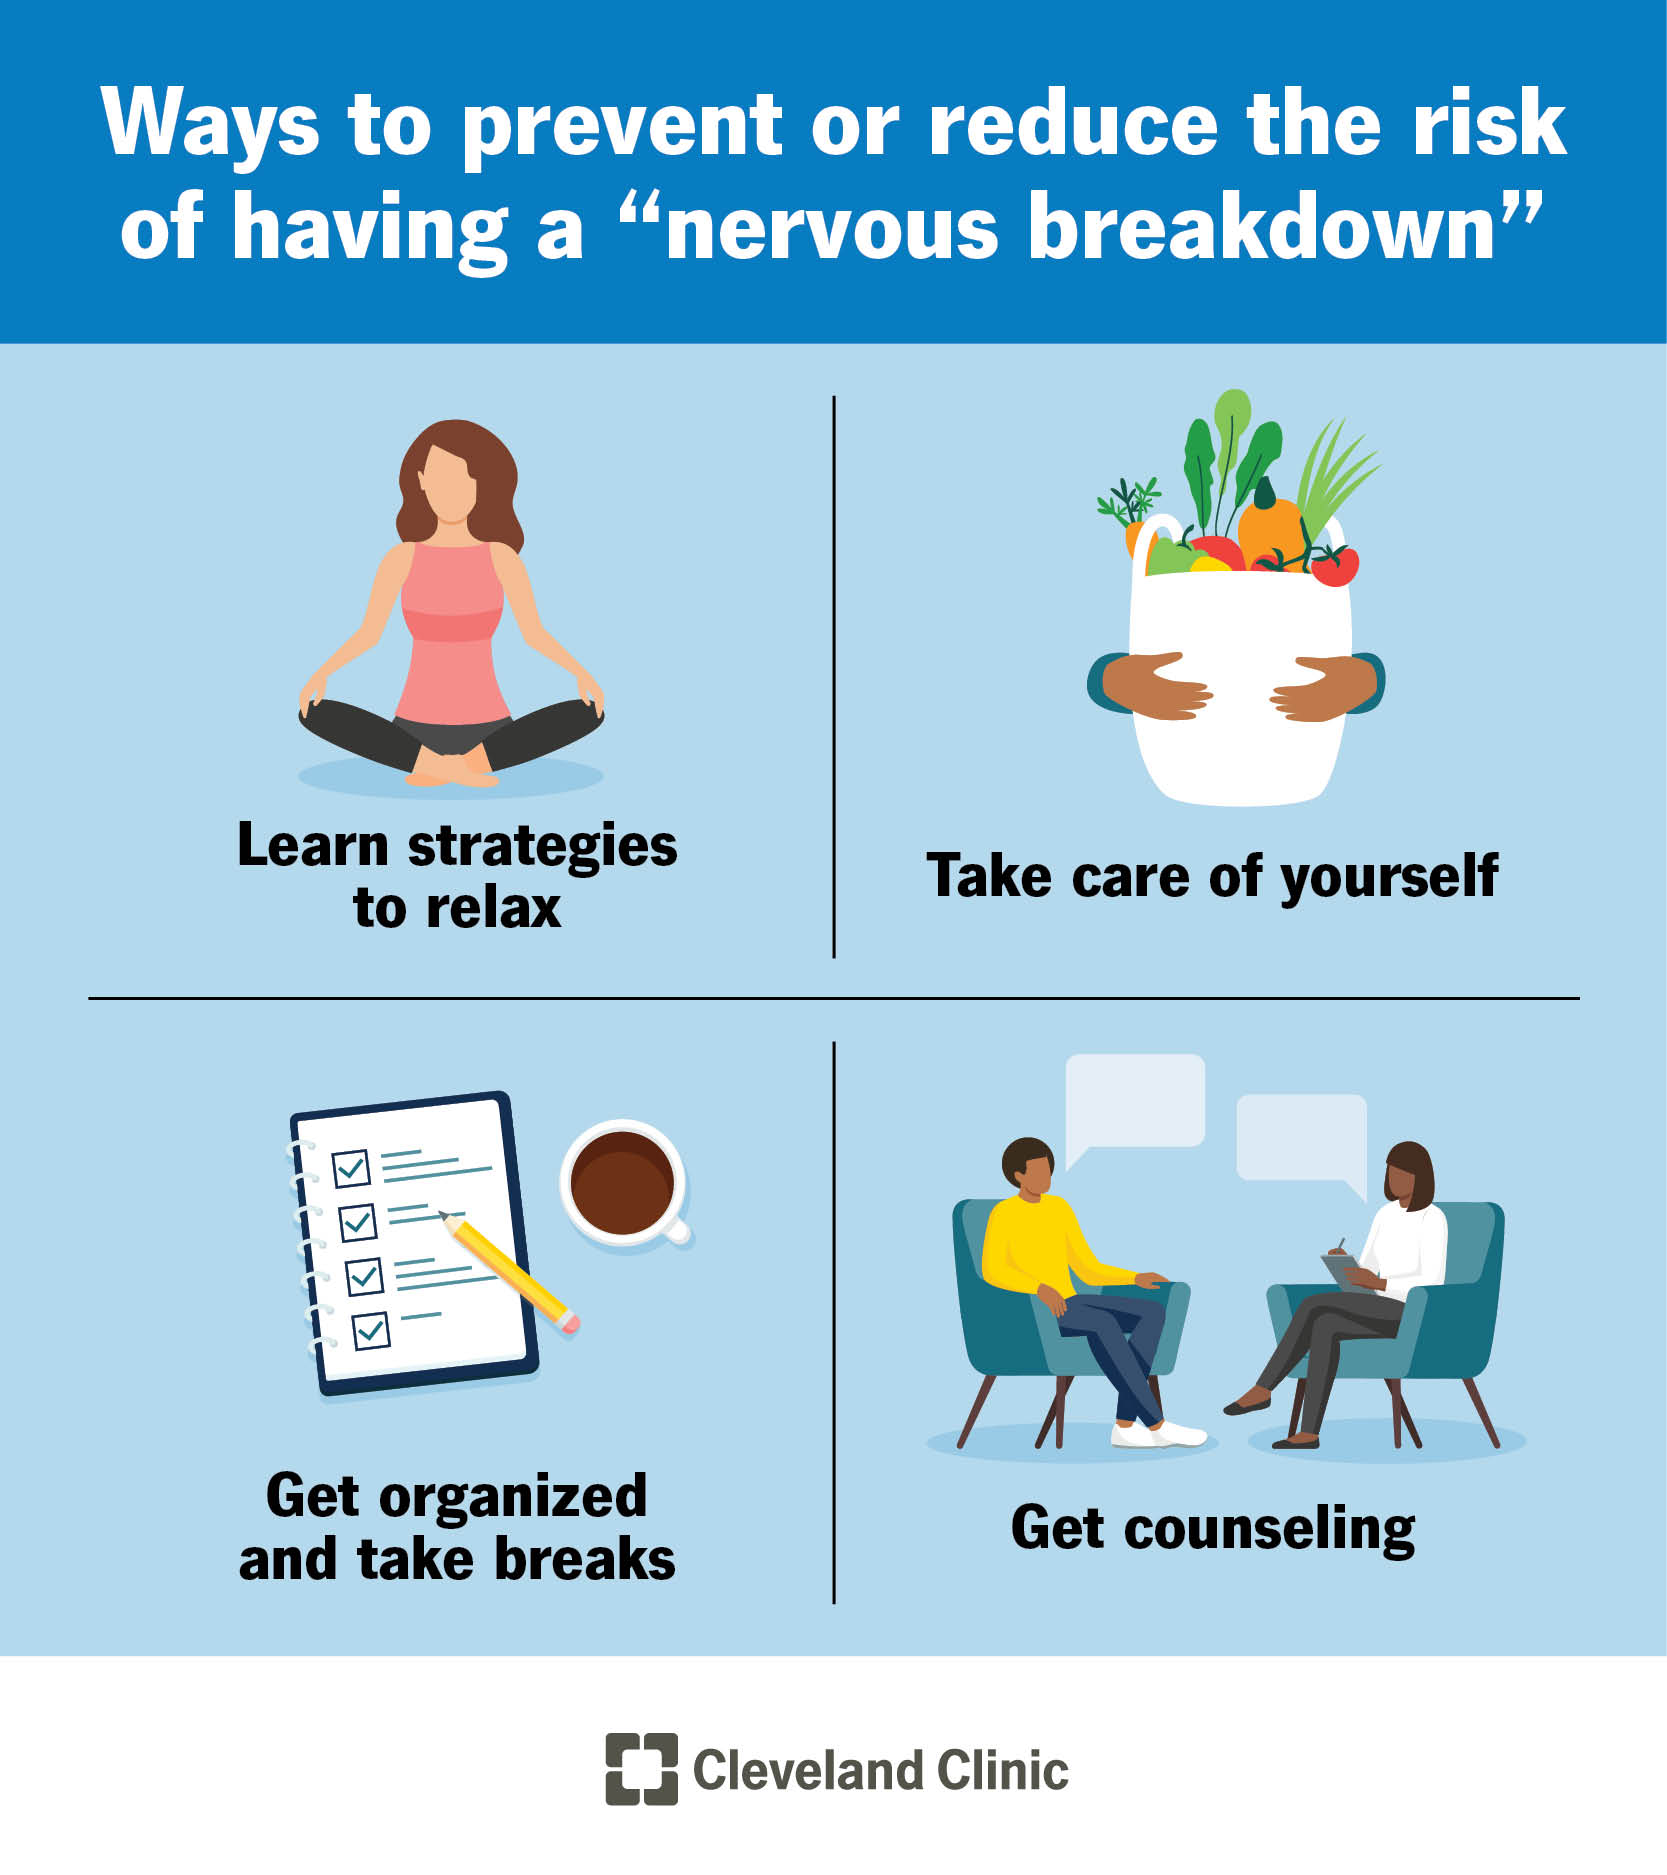 You can reduce your risk of having a "nervous breakdown" with self-care, organization, therapy and more.